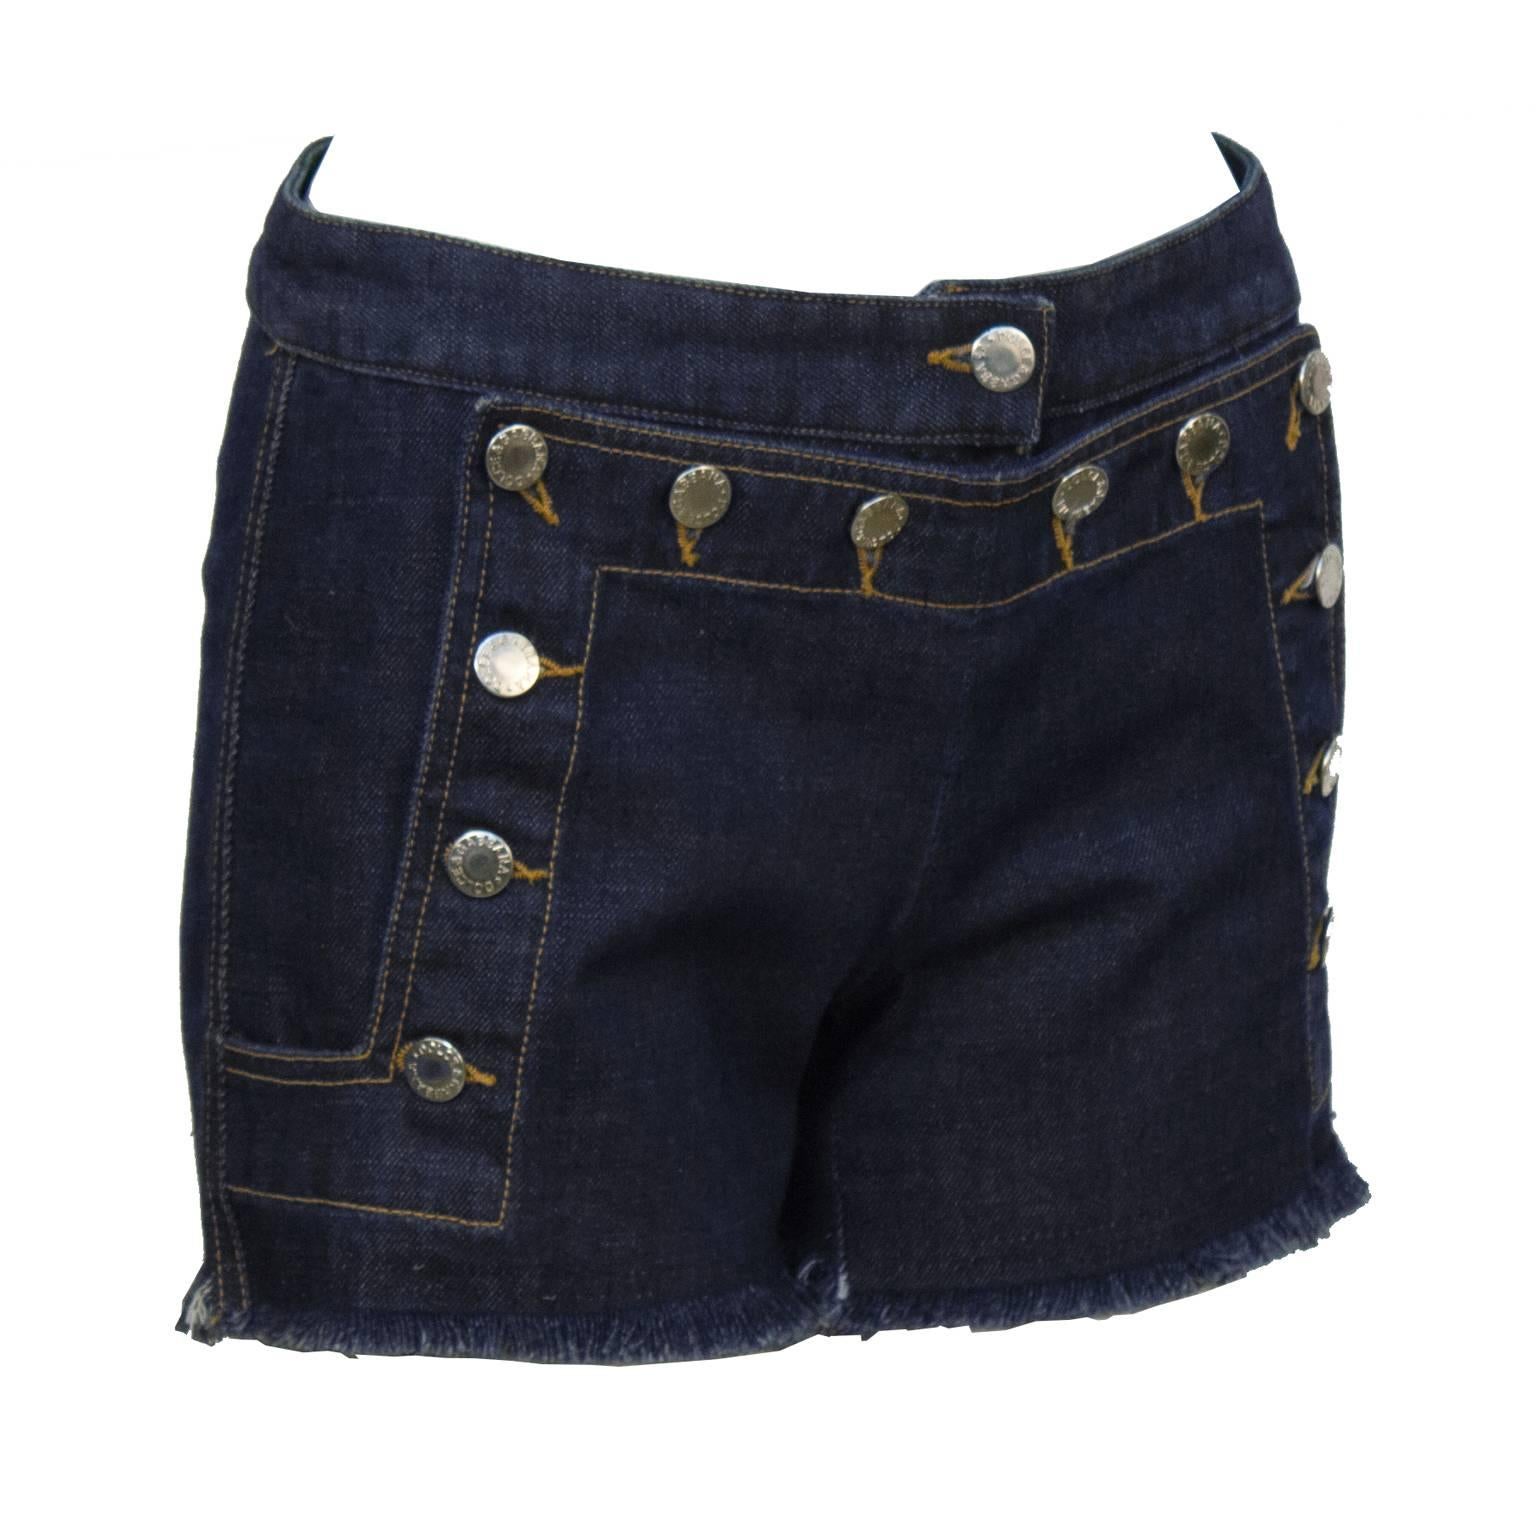 Flirty denim shorts by Dolce & Gabbana from the 1990's. The shorts do up sailor style at the front with silver Dolce & Gabbana logo buttons. Cut off frayed hem and black lace up detail on the back makes these perfect for the summer. In excellent